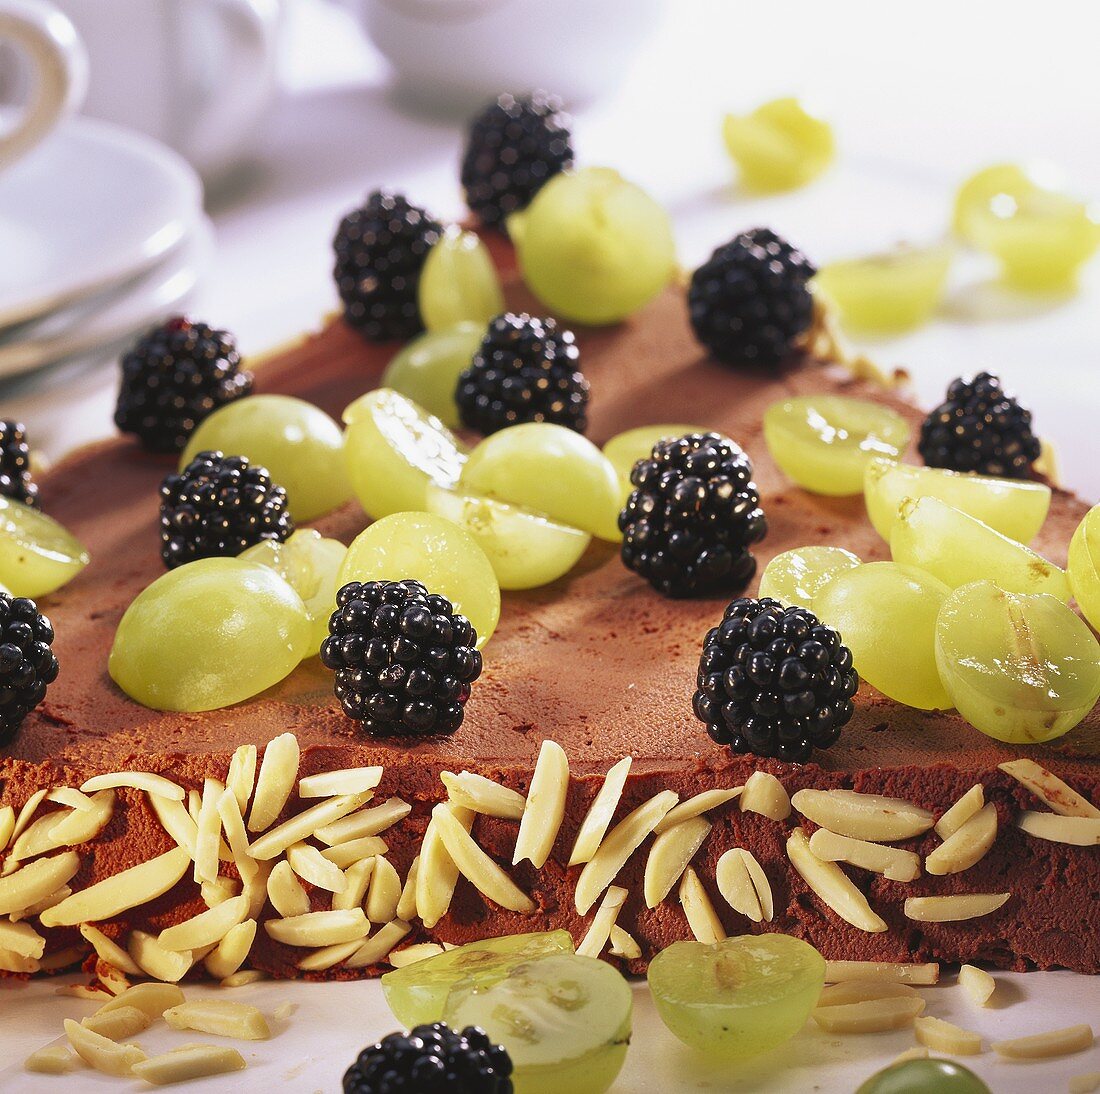 Triangle cake with grapes and blackberries